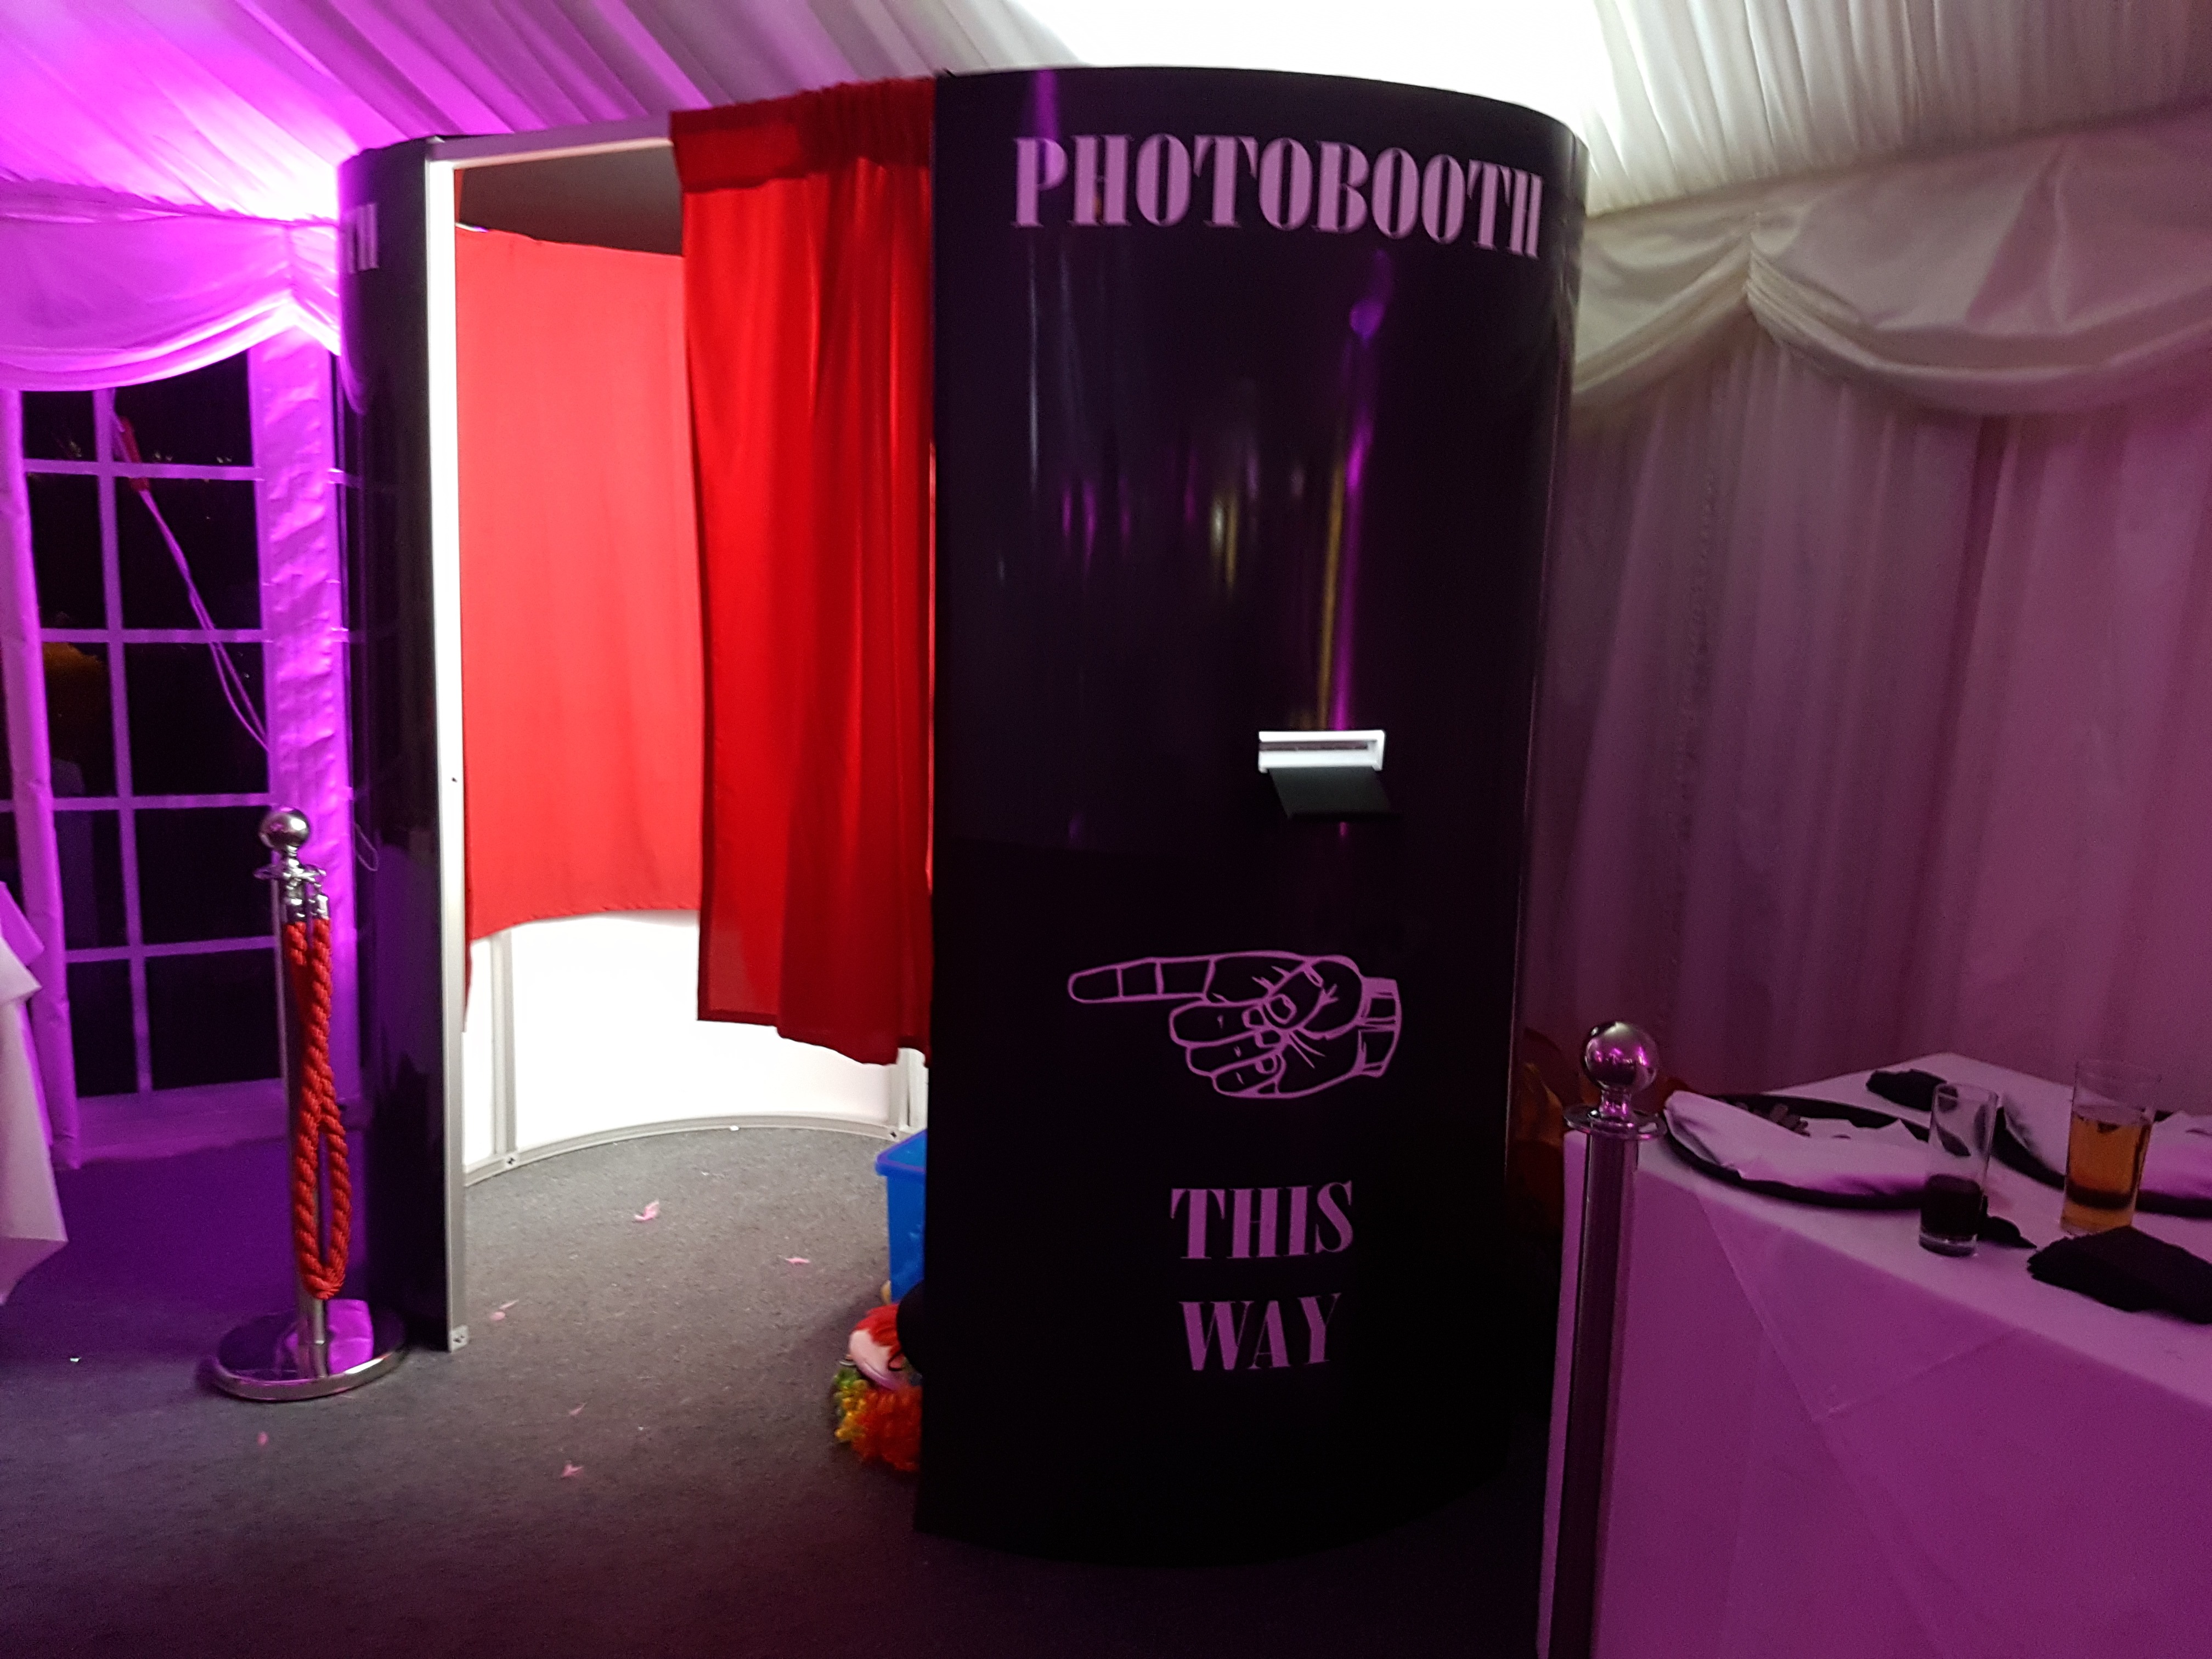 Photo Booth out in full Swing